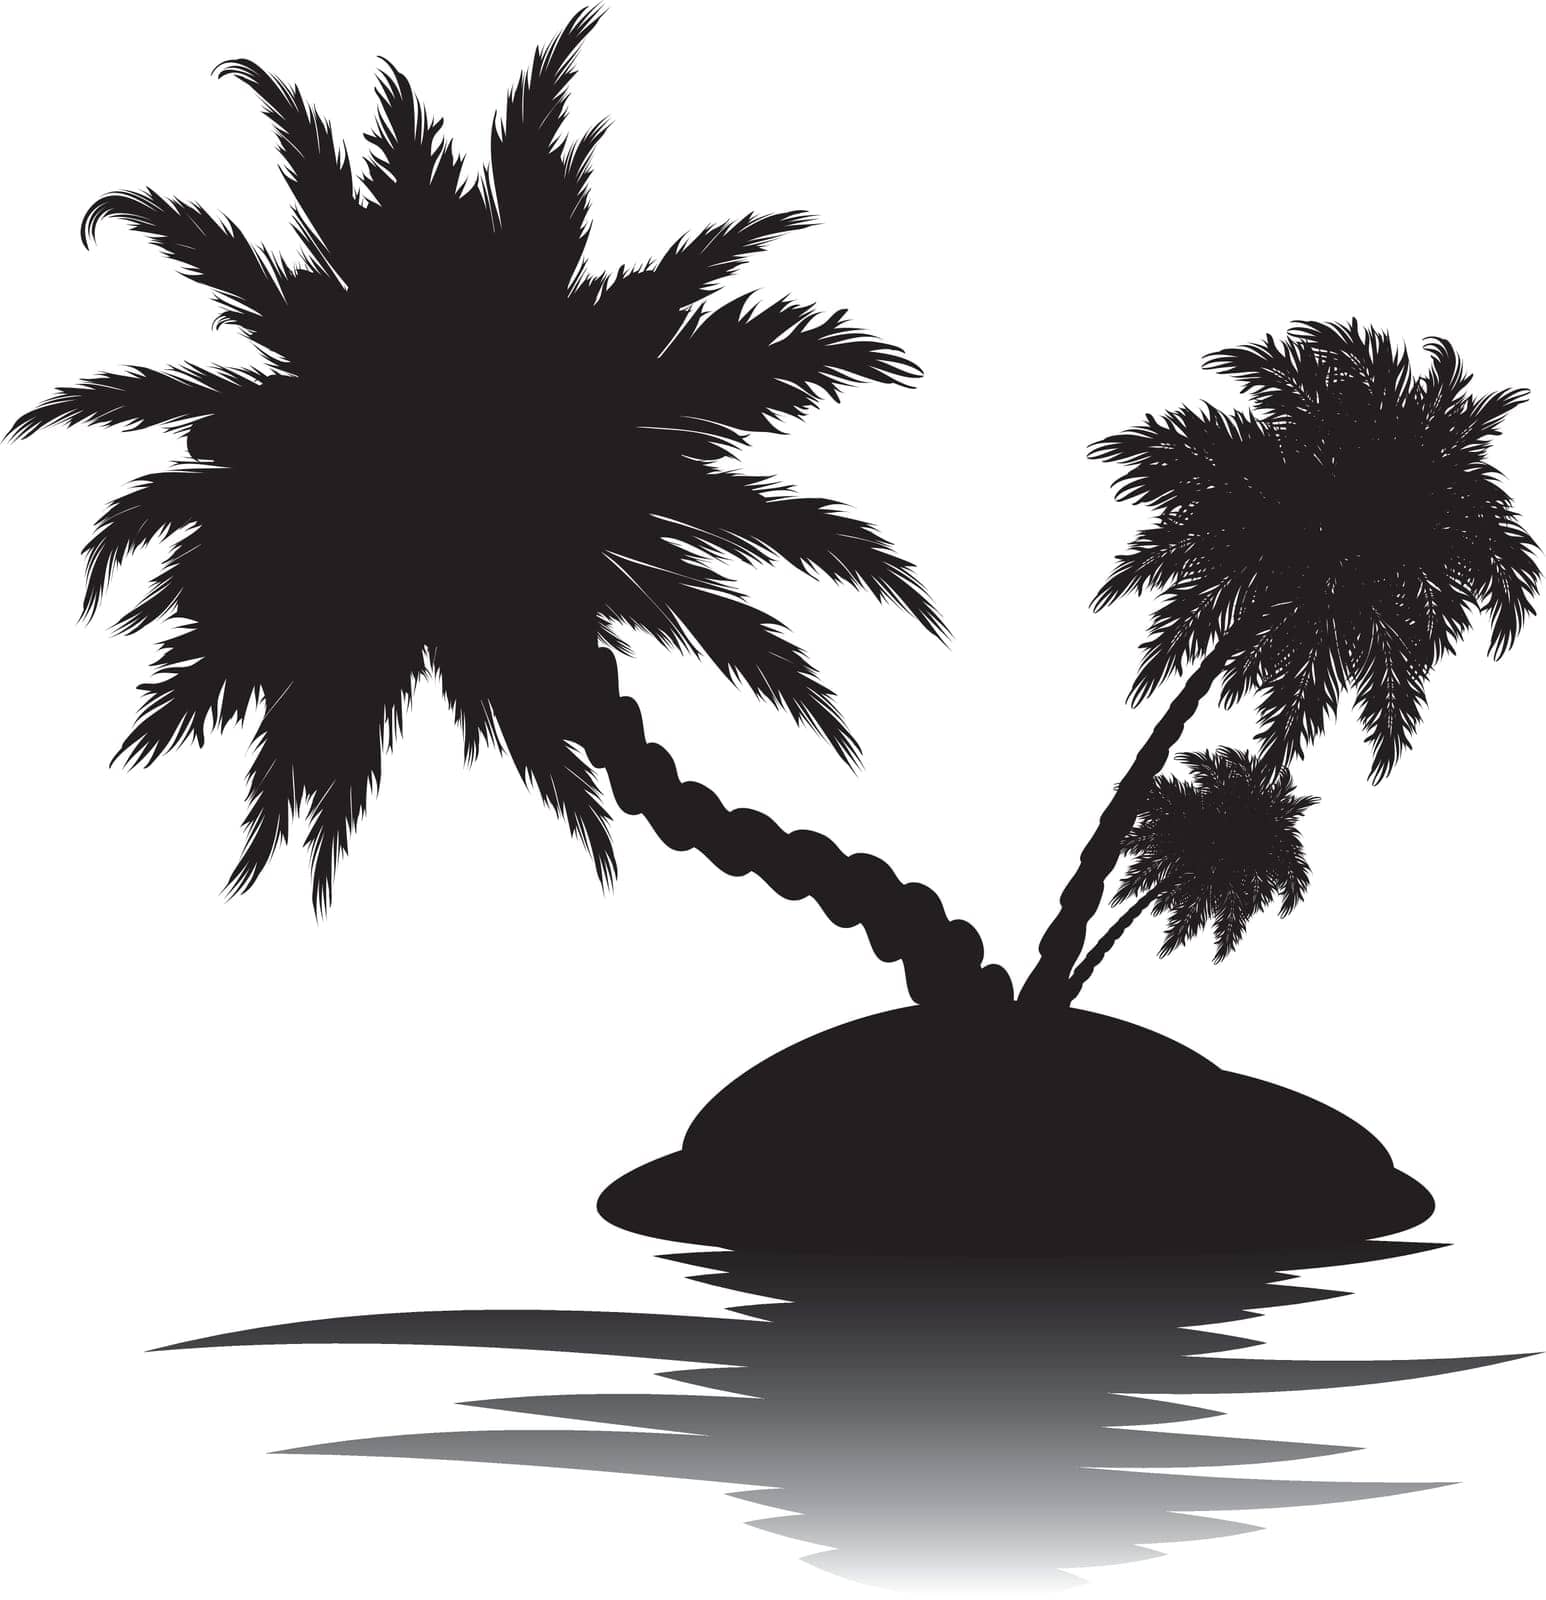 green,nature,island,palm,objects,tree,isolated,climate,leaf,trees,summer,sea,silhouette3,tropical,sand,palmtree,white,outdoors,coco,beach,plant,travel,scenics